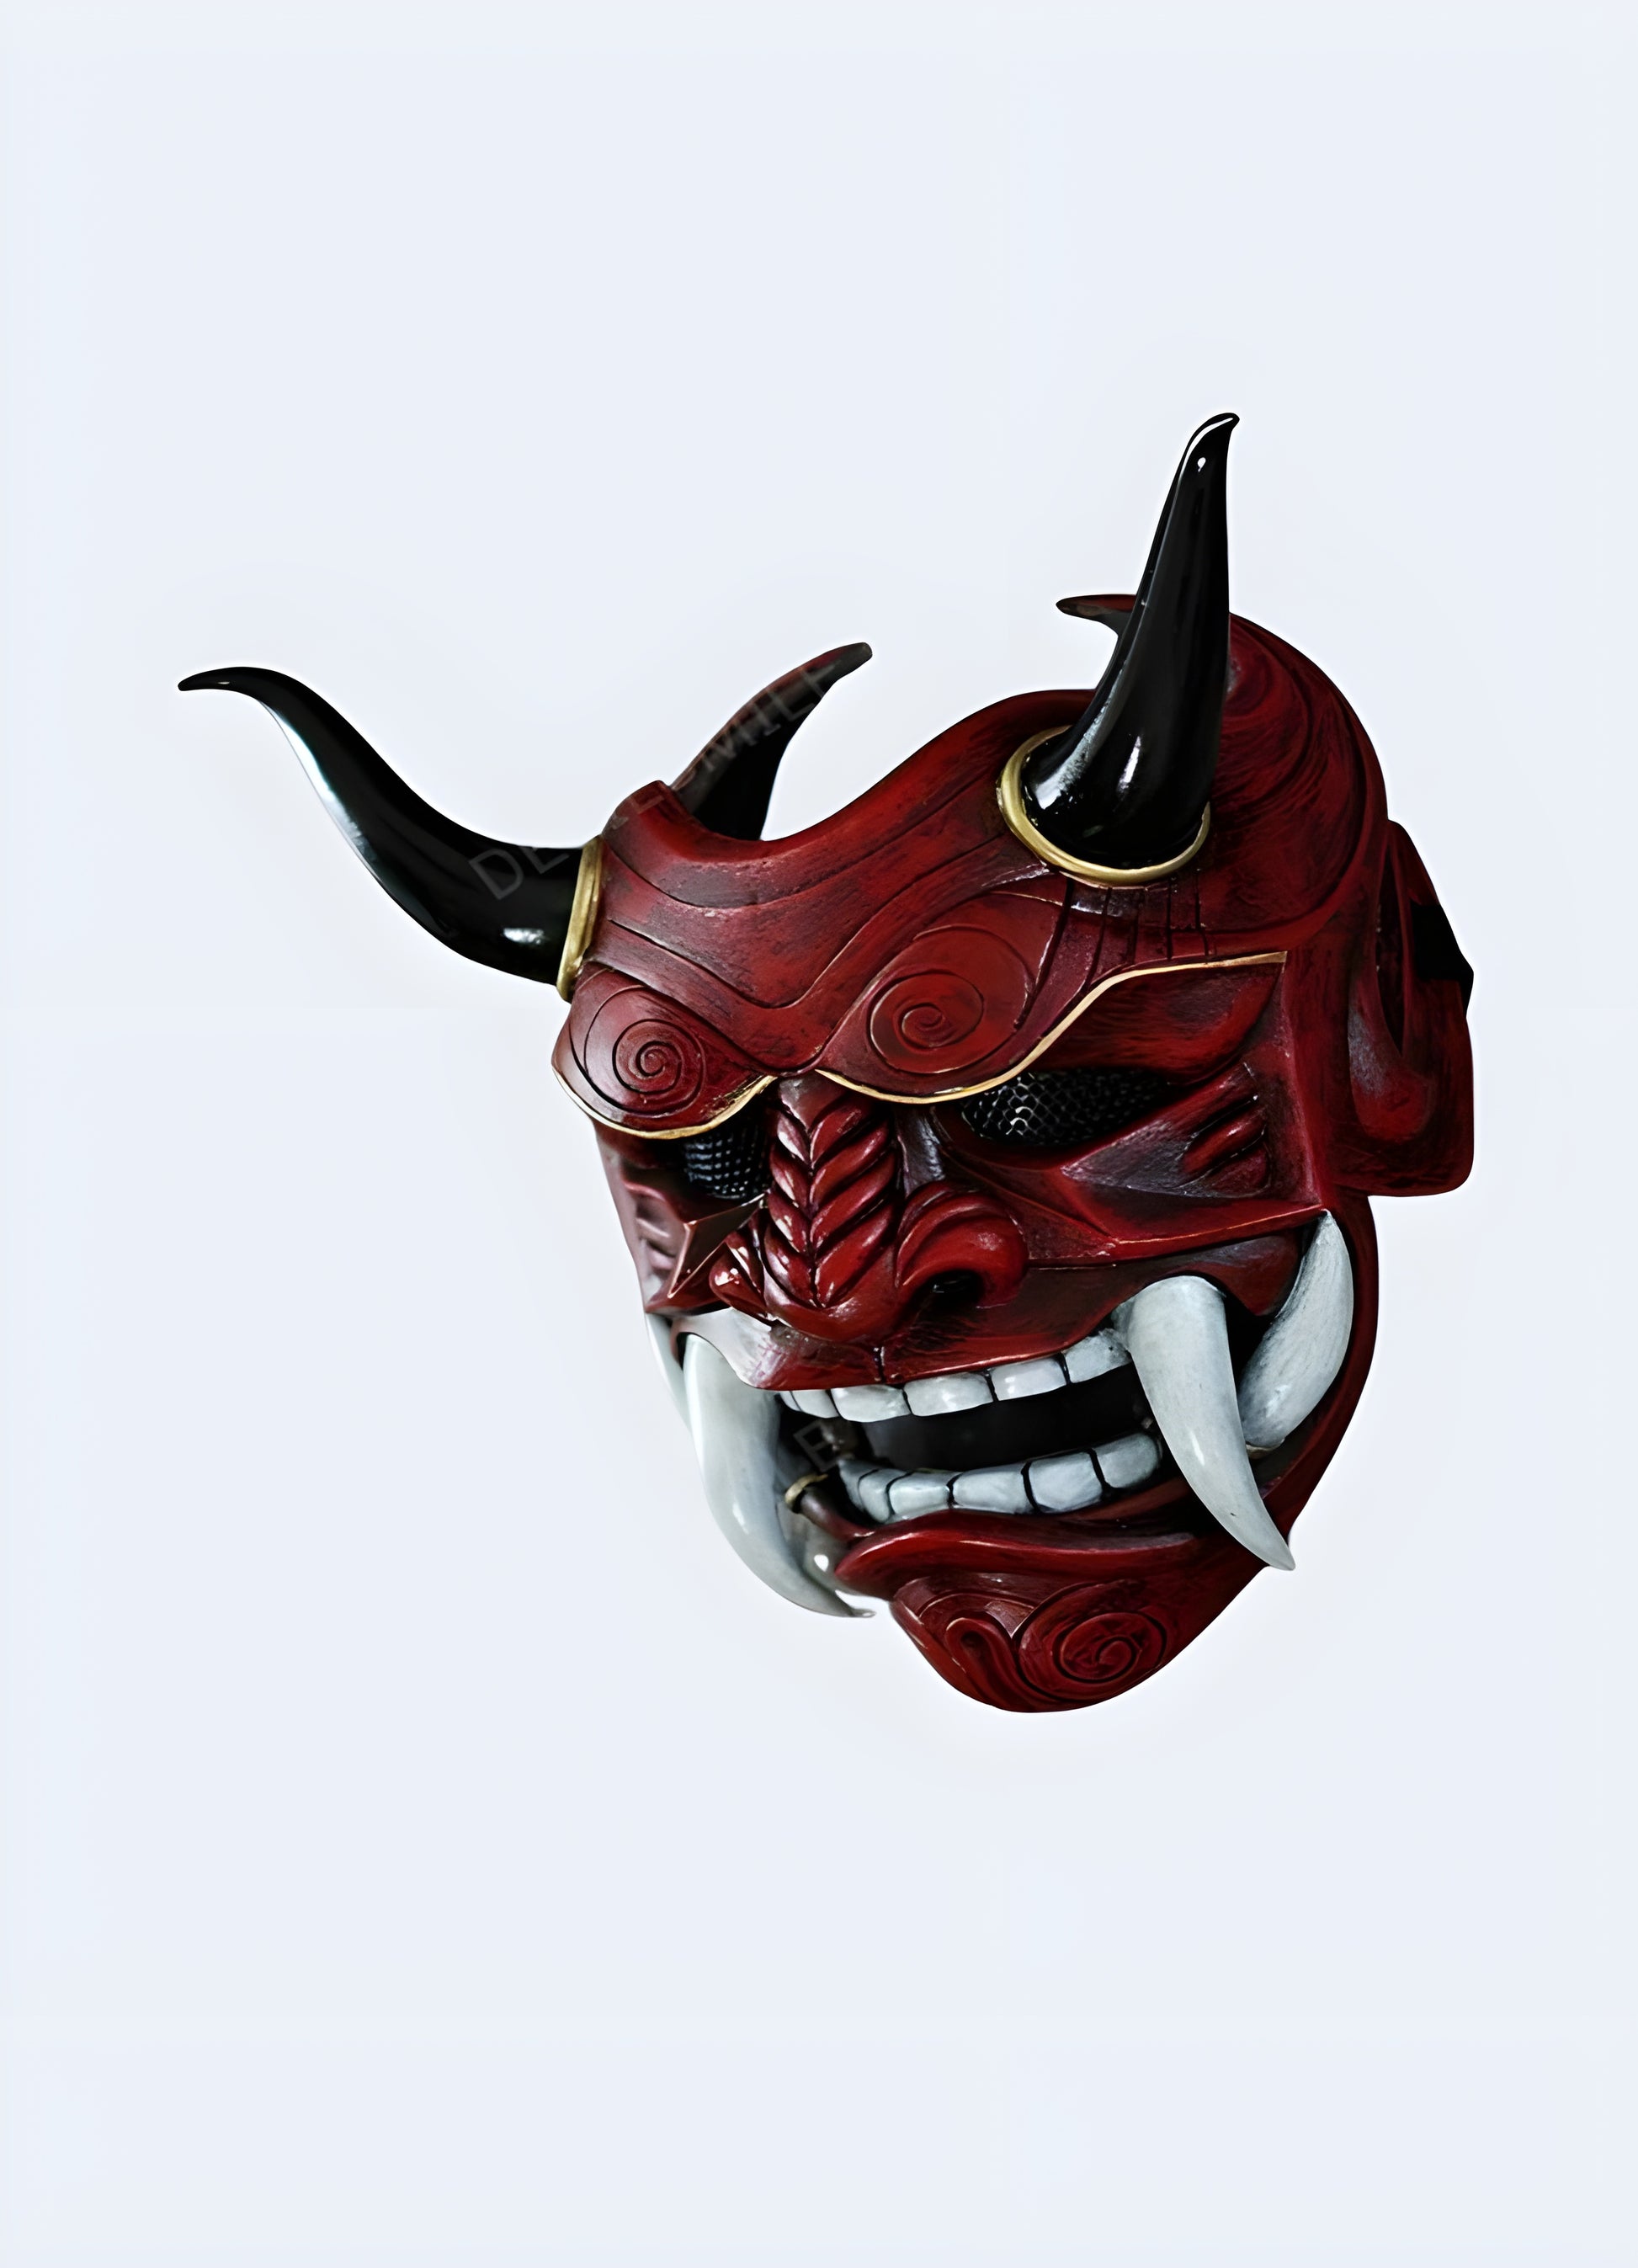 This mask symbolizes the Bushido way, the way of the warrior.